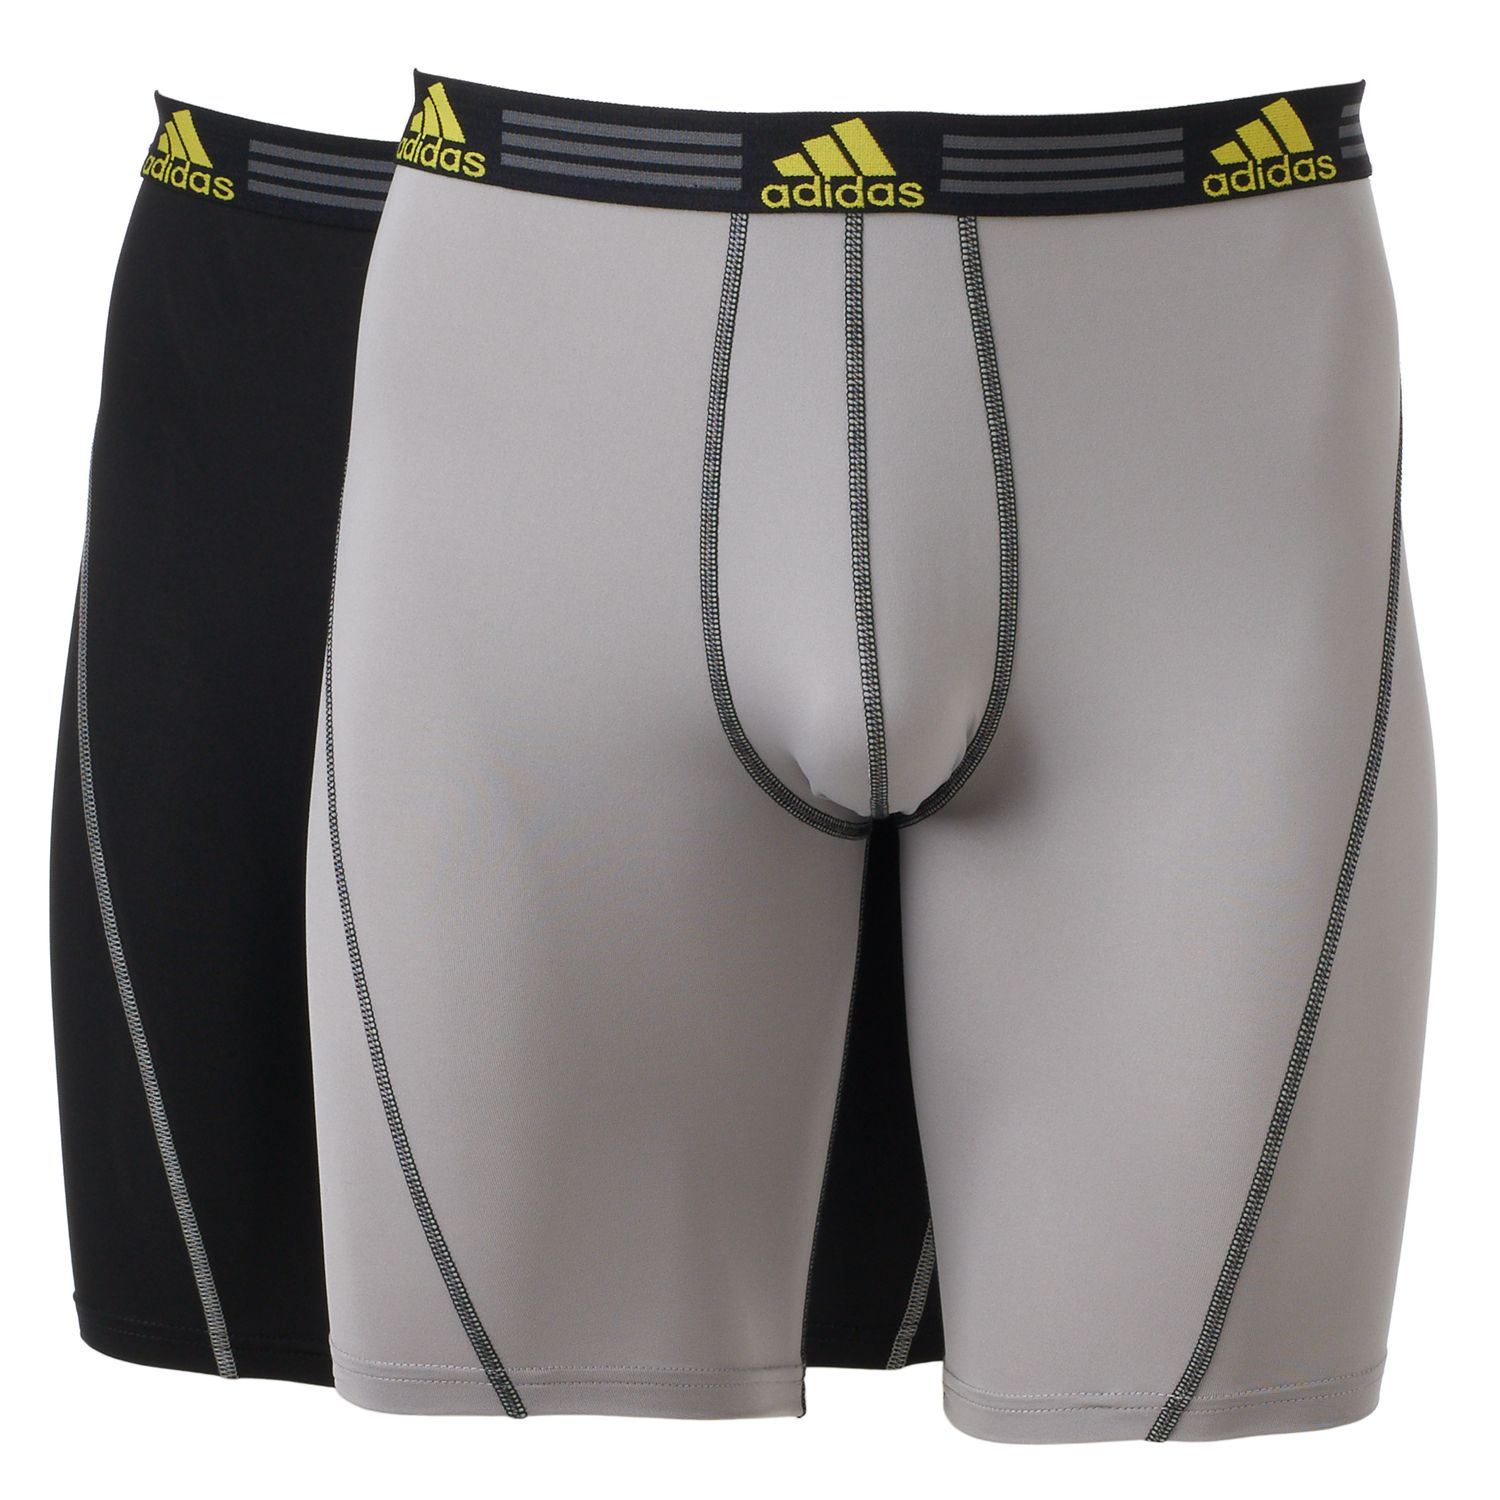 adidas men's climacool 7 midway briefs 94